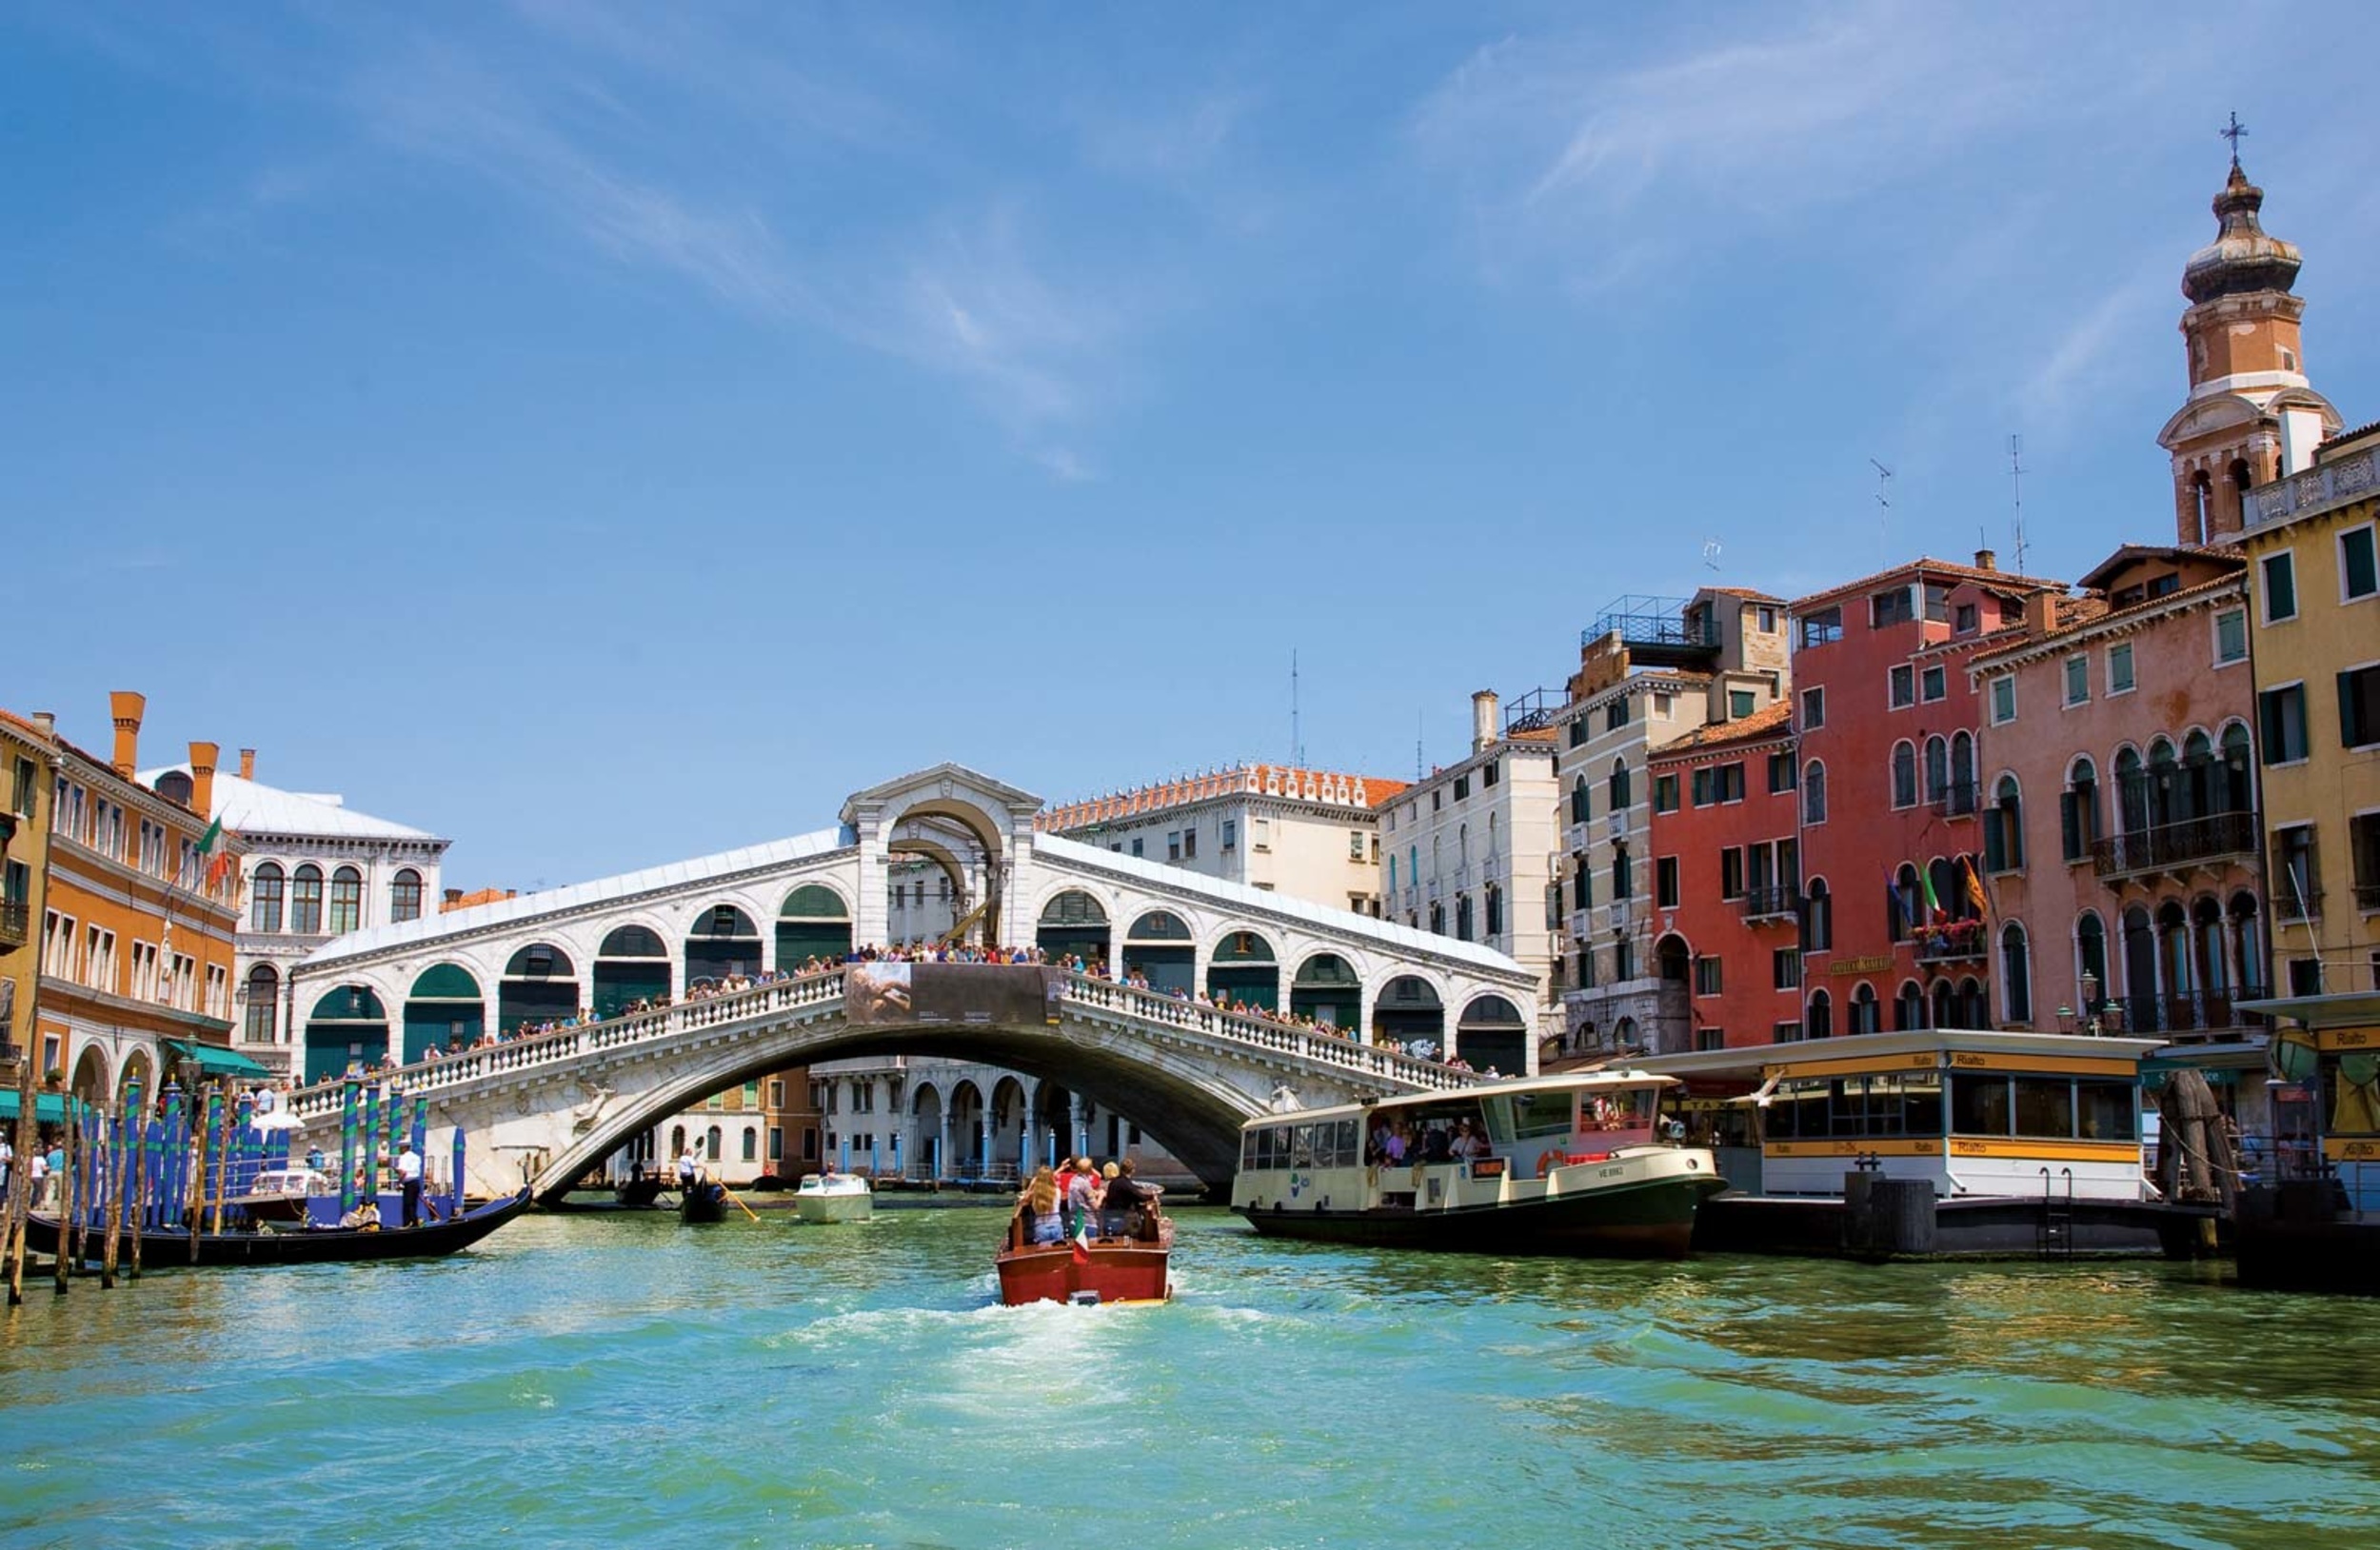 <p>Another candidate for best-selfie: Rialto Bridge has the best view of the Grand Canal, though best not to go midday. Like every main attraction in Venice, make plans to go in the morning or at night. </p><p>You may also like: <a href='https://www.yardbarker.com/lifestyle/articles/15_things_to_do_in_luxembourg_according_to_someone_who_used_to_live_there/s1__38224039'>15 things to do in Luxembourg, according to someone who used to live there</a></p>